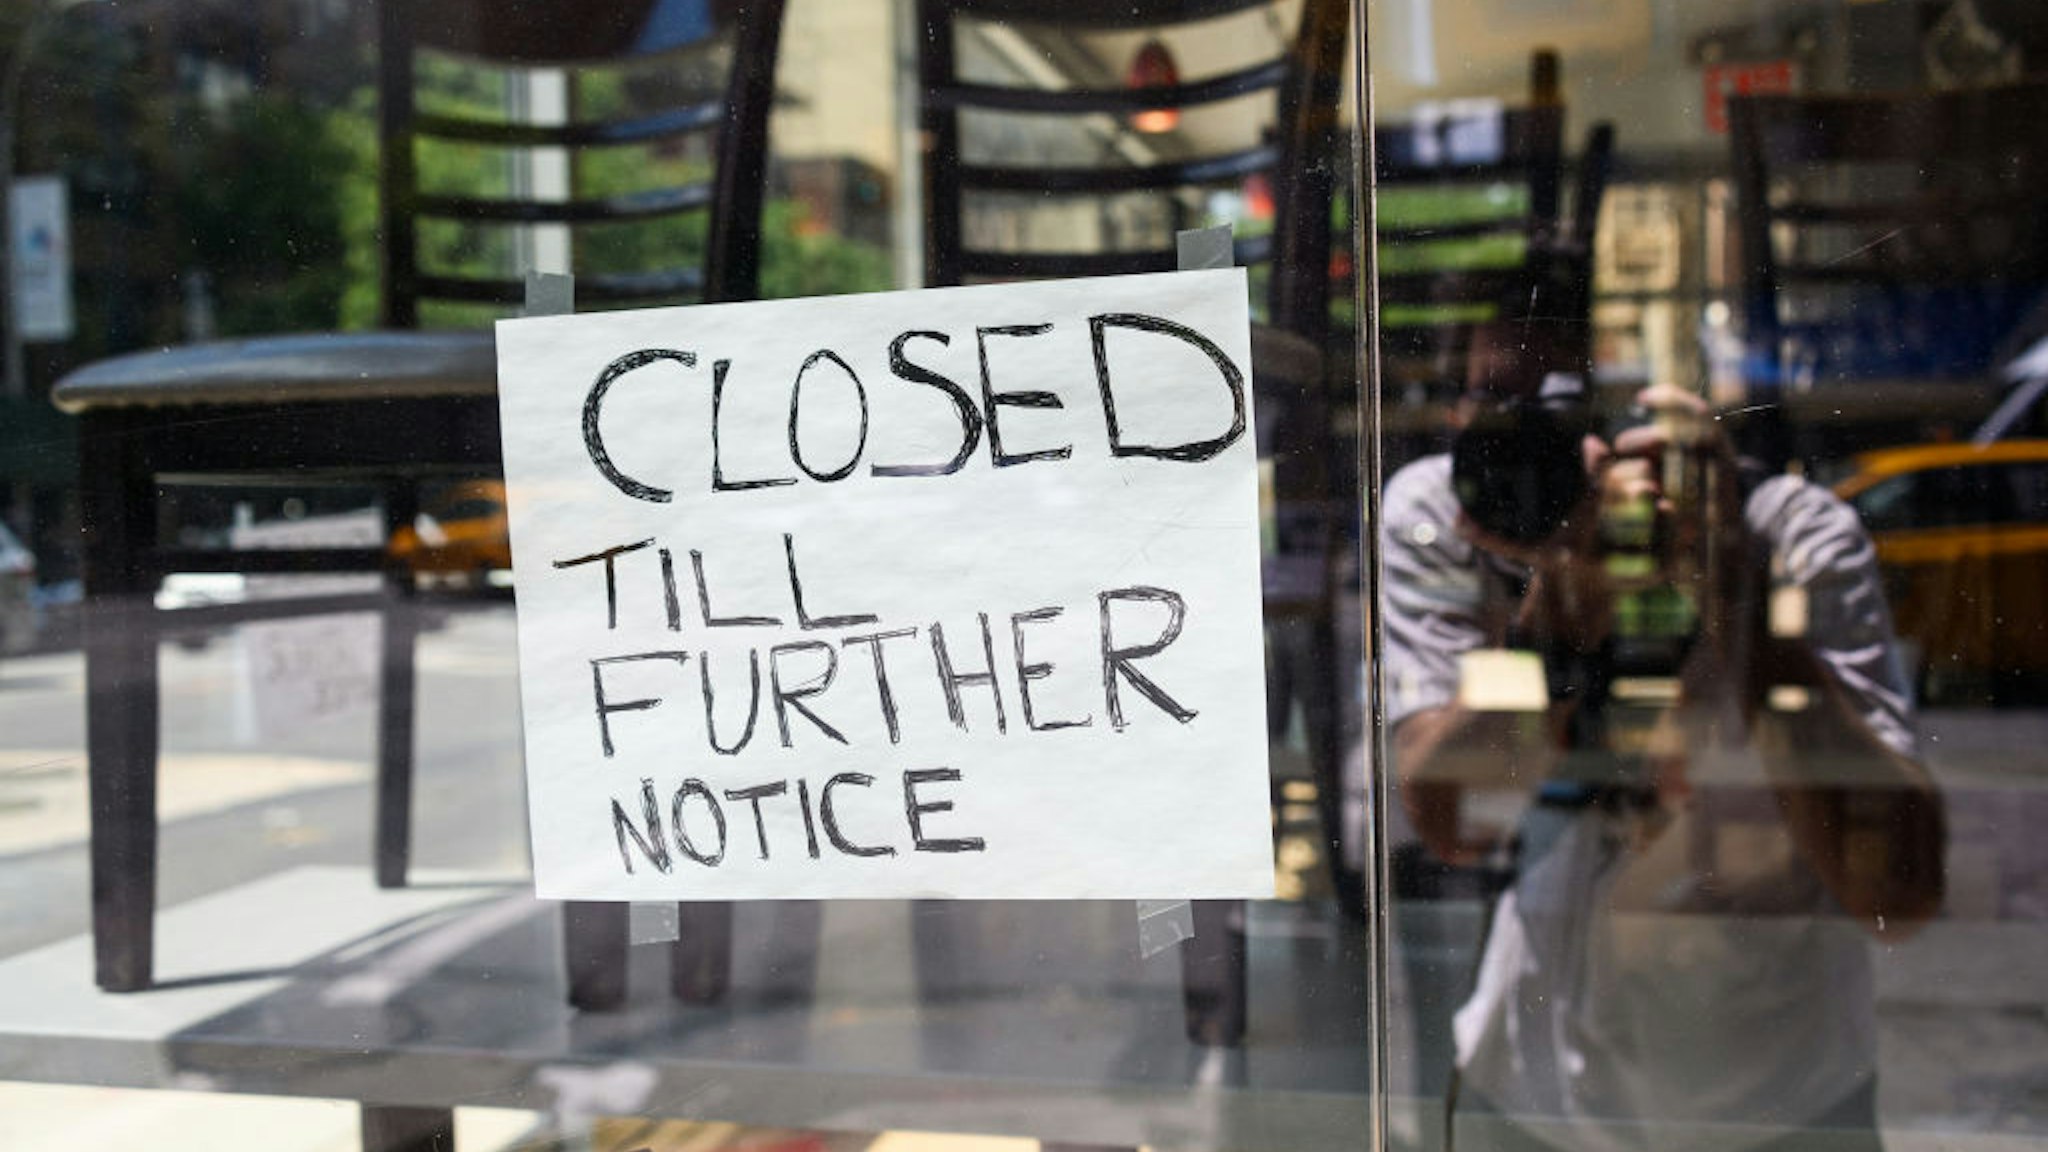 NEW YORK, NEW YORK - JULY 28: A sign is posted at a restaurant that reads, "closed till further notice" as the city continues Phase 4 of re-opening following restrictions imposed to slow the spread of coronavirus on July 28, 2020 in New York City. The fourth phase allows outdoor arts and entertainment, sporting events without fans and media production. (Photo by Noam Galai/Getty Images)